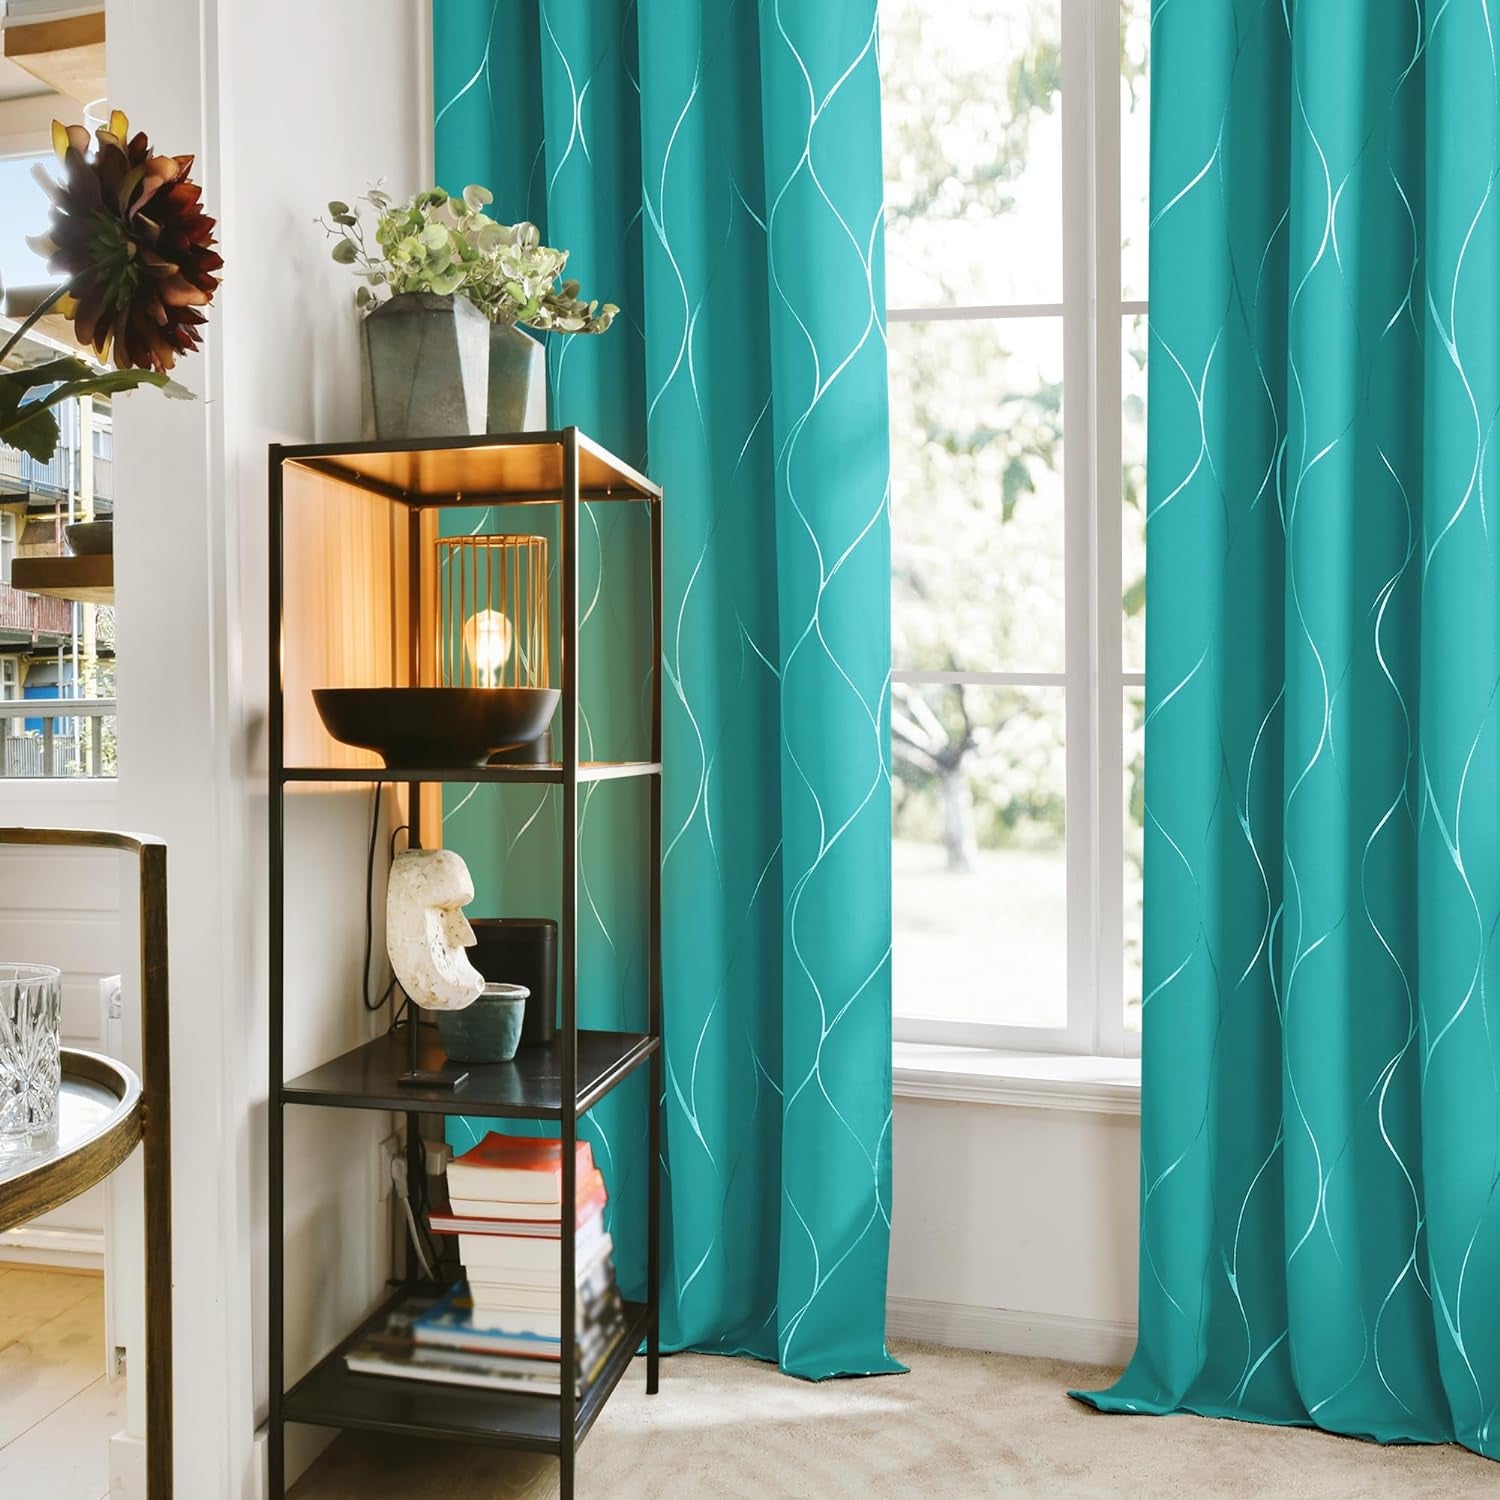 Deconovo Blackout Curtains with Foil Wave Pattern, Grommet Curtain Room Darkening Window Panels, Thermal Insulated Curtain Drapes for Nursery Room (42W X 54L Inch, 2 Panels, Turquoise)  DECONOVO   